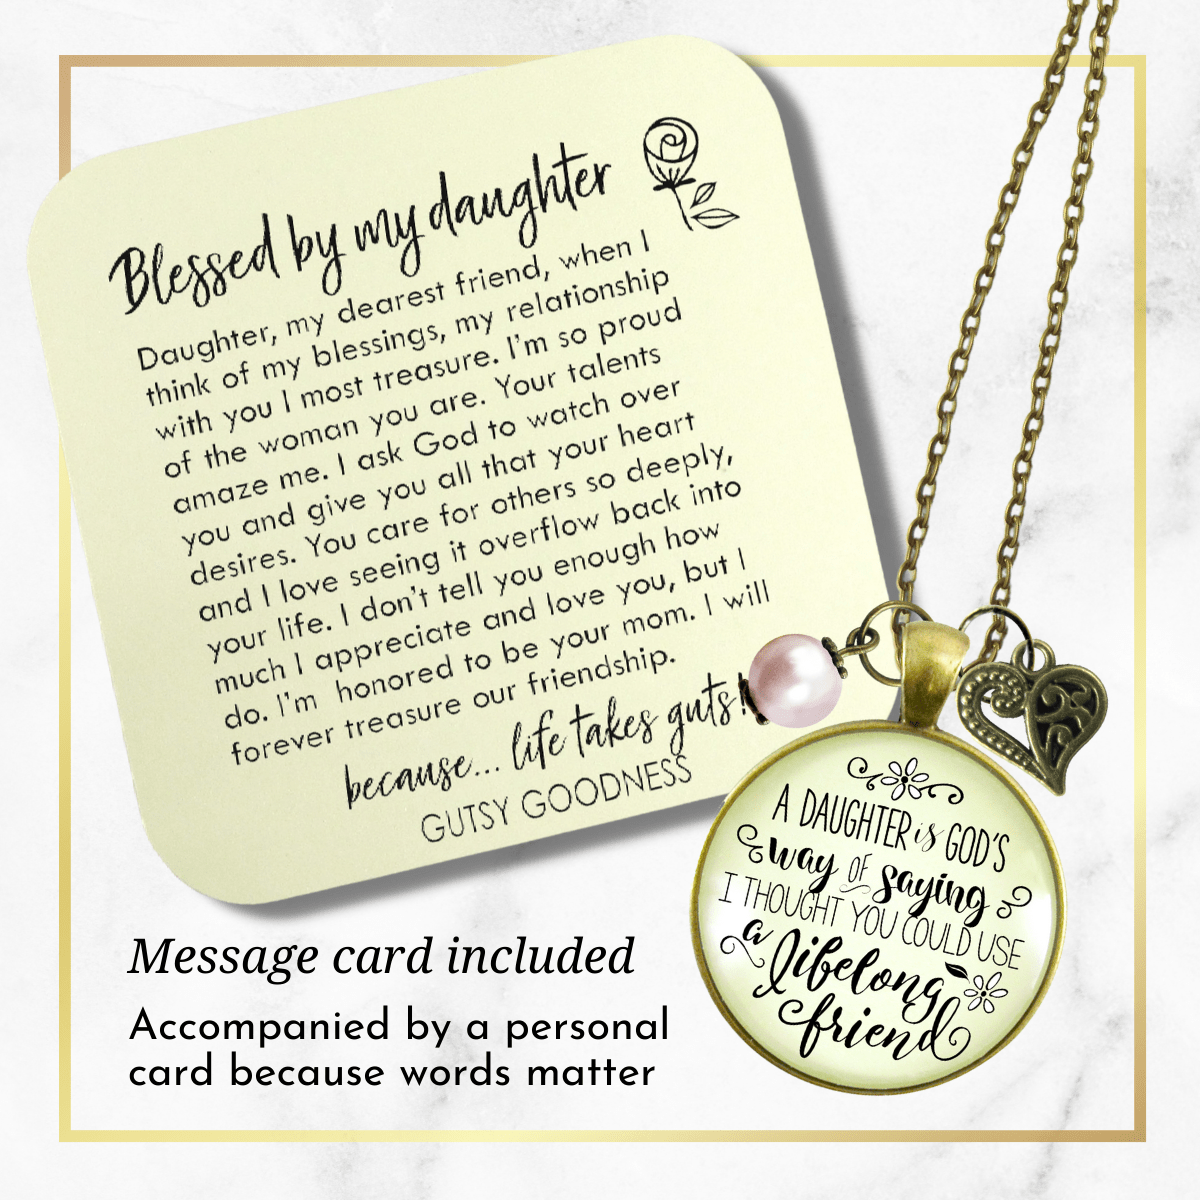 Gutsy Goodness Daughter Necklace From Mother Celebrate Friends Retro Inspire Jewelry Heart Gift - Gutsy Goodness;Daughter Necklace From Mother Celebrate Friends Retro Inspire Jewelry Heart Gift - Gutsy Goodness Handmade Jewelry Gifts